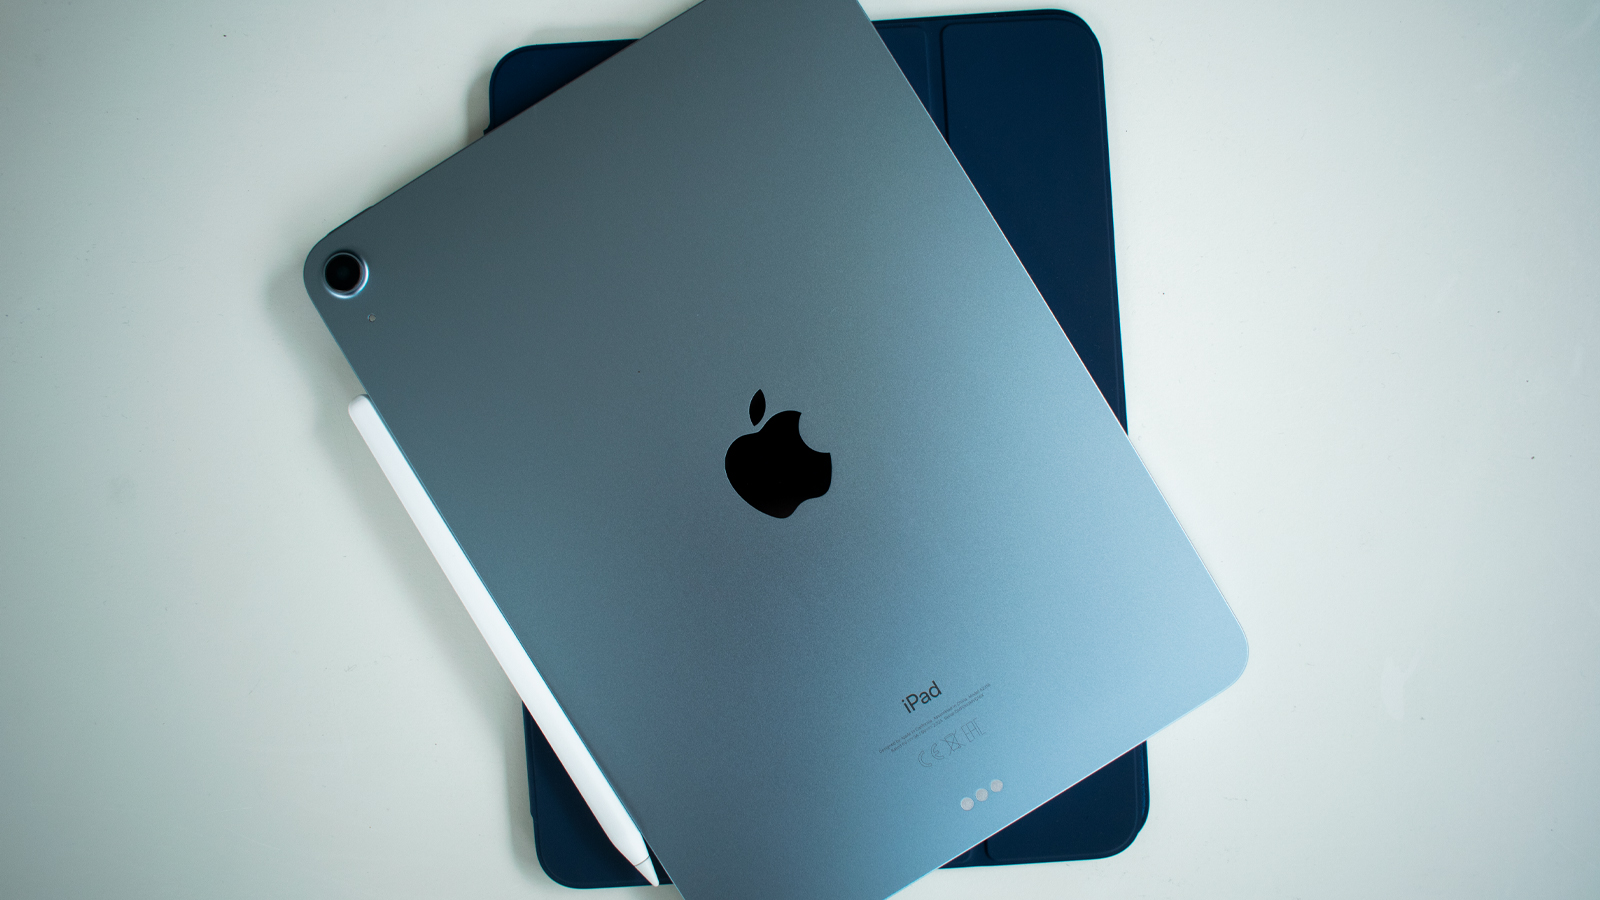 Want to buy iPad Air 4 Apple gives 100 discount